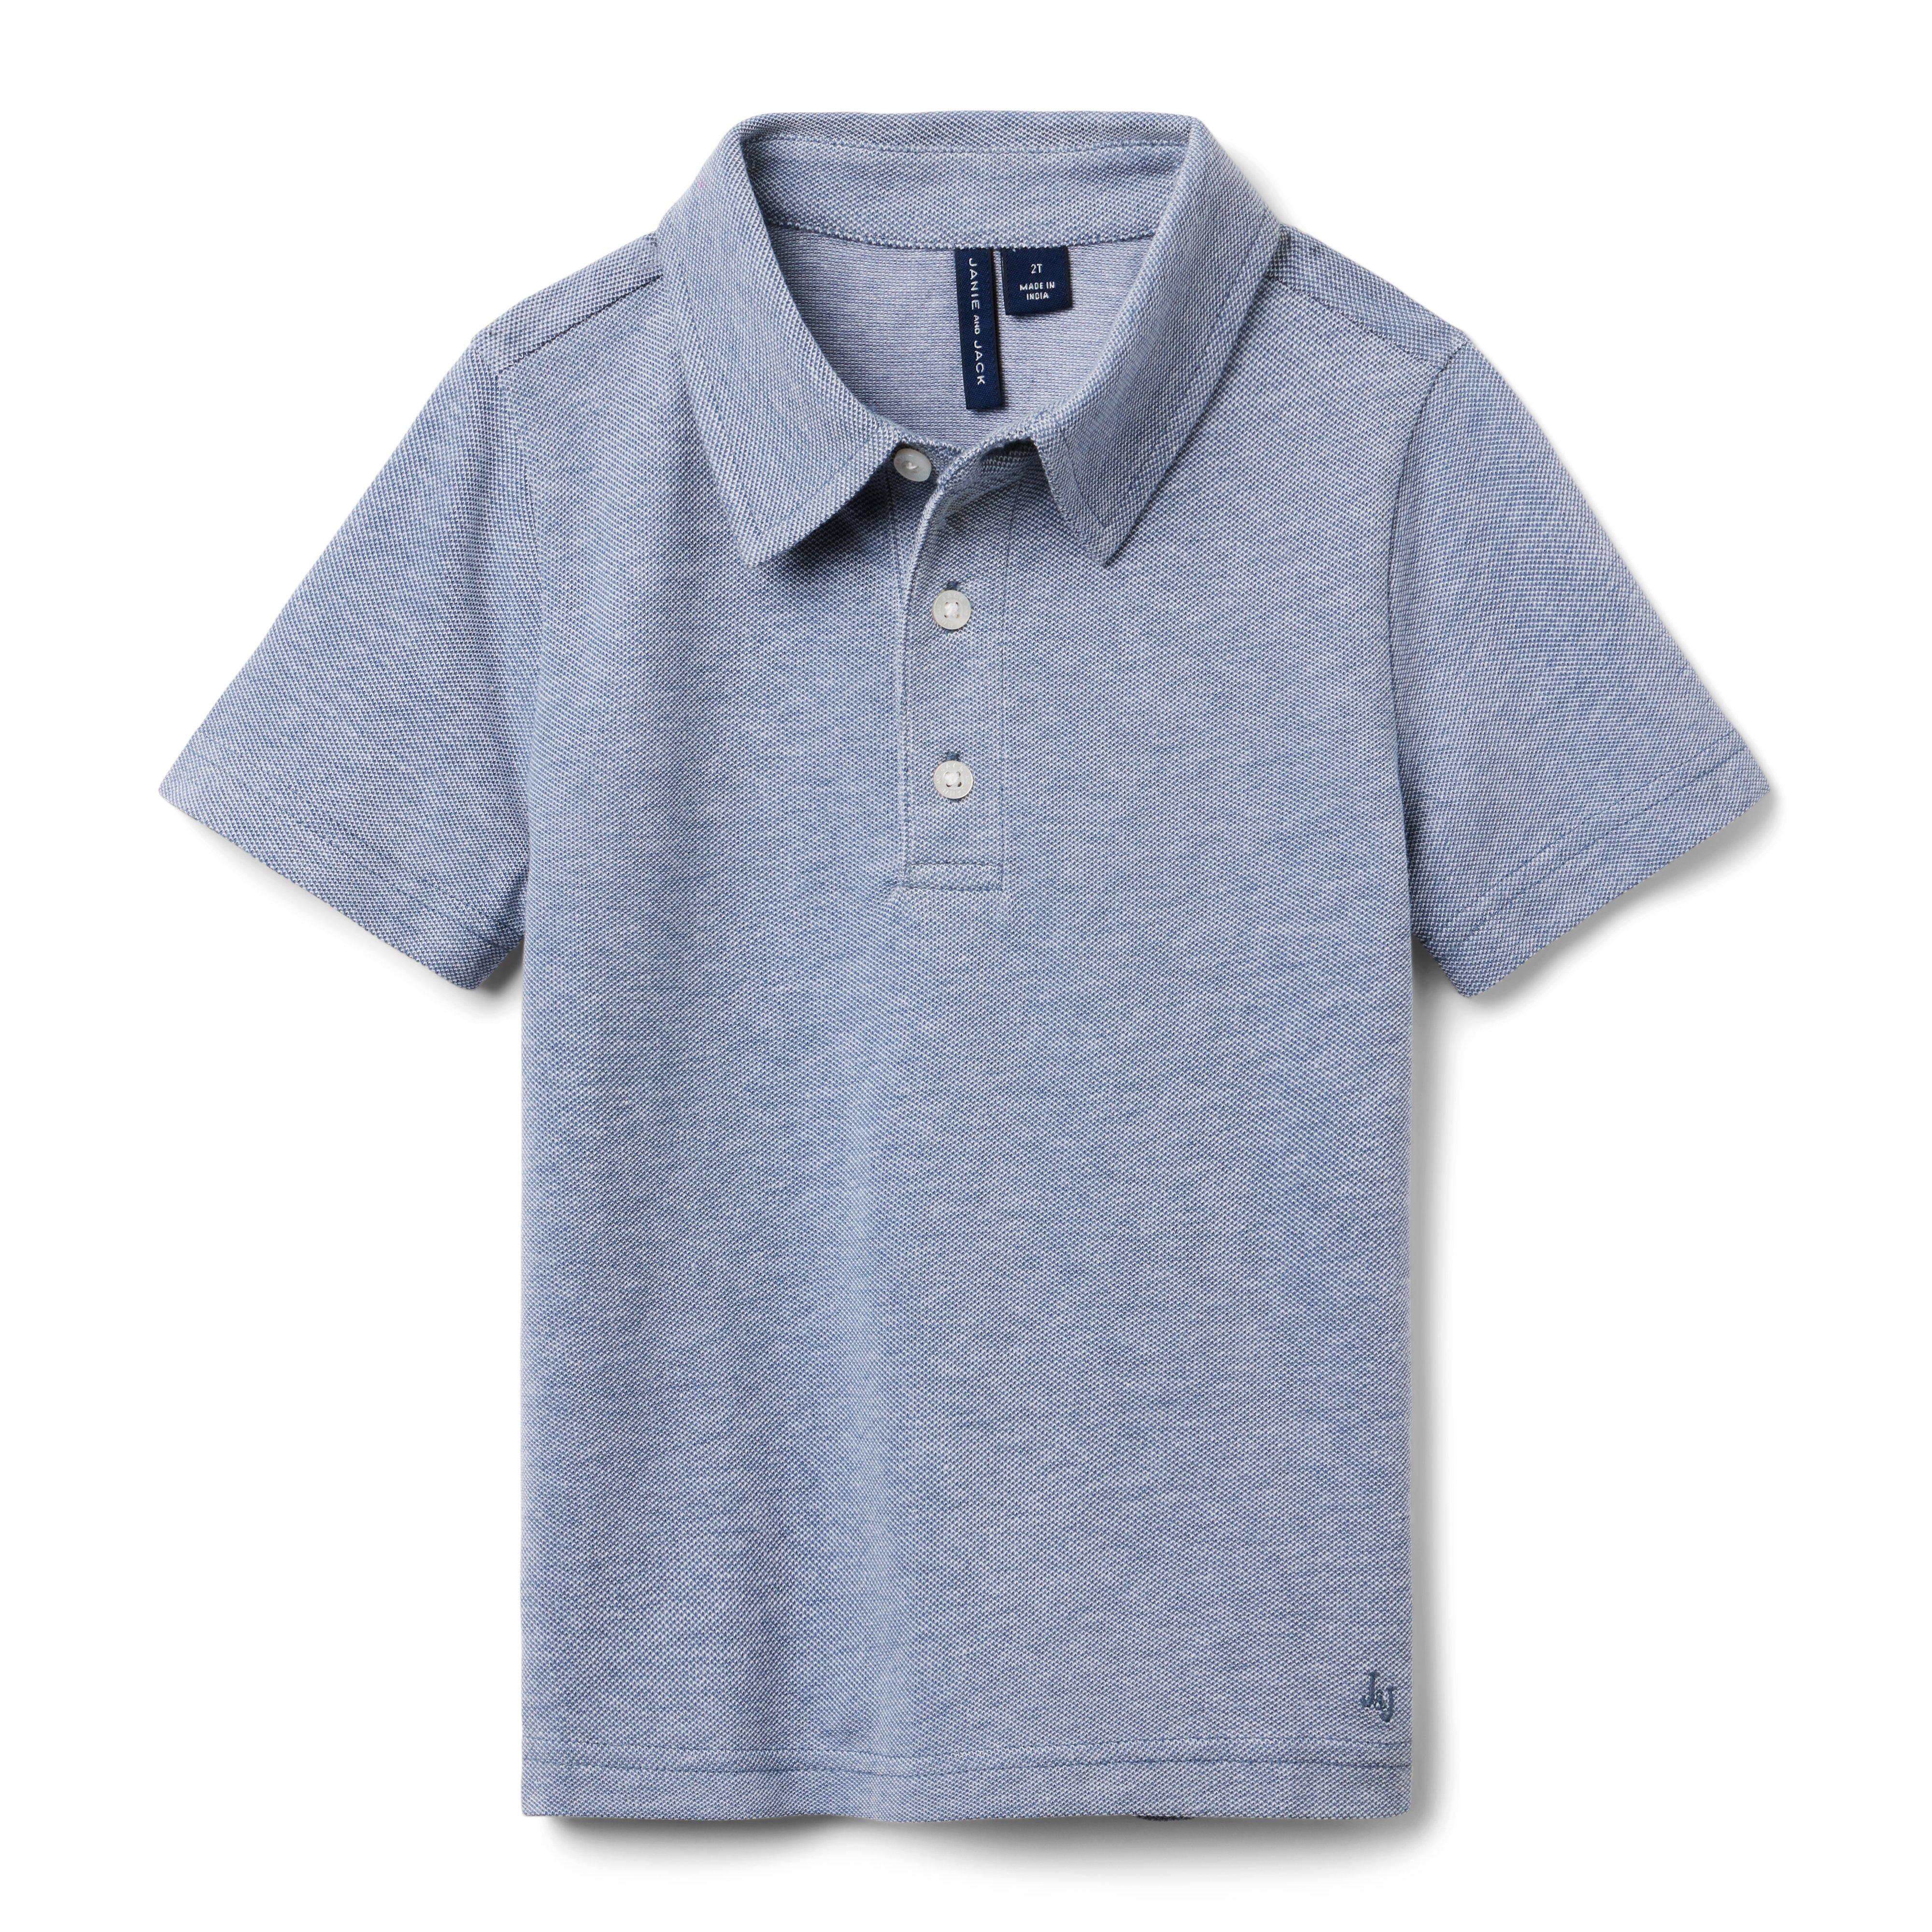 Boy Vintage Indigo The Classic Pique Polo by Janie and Jack